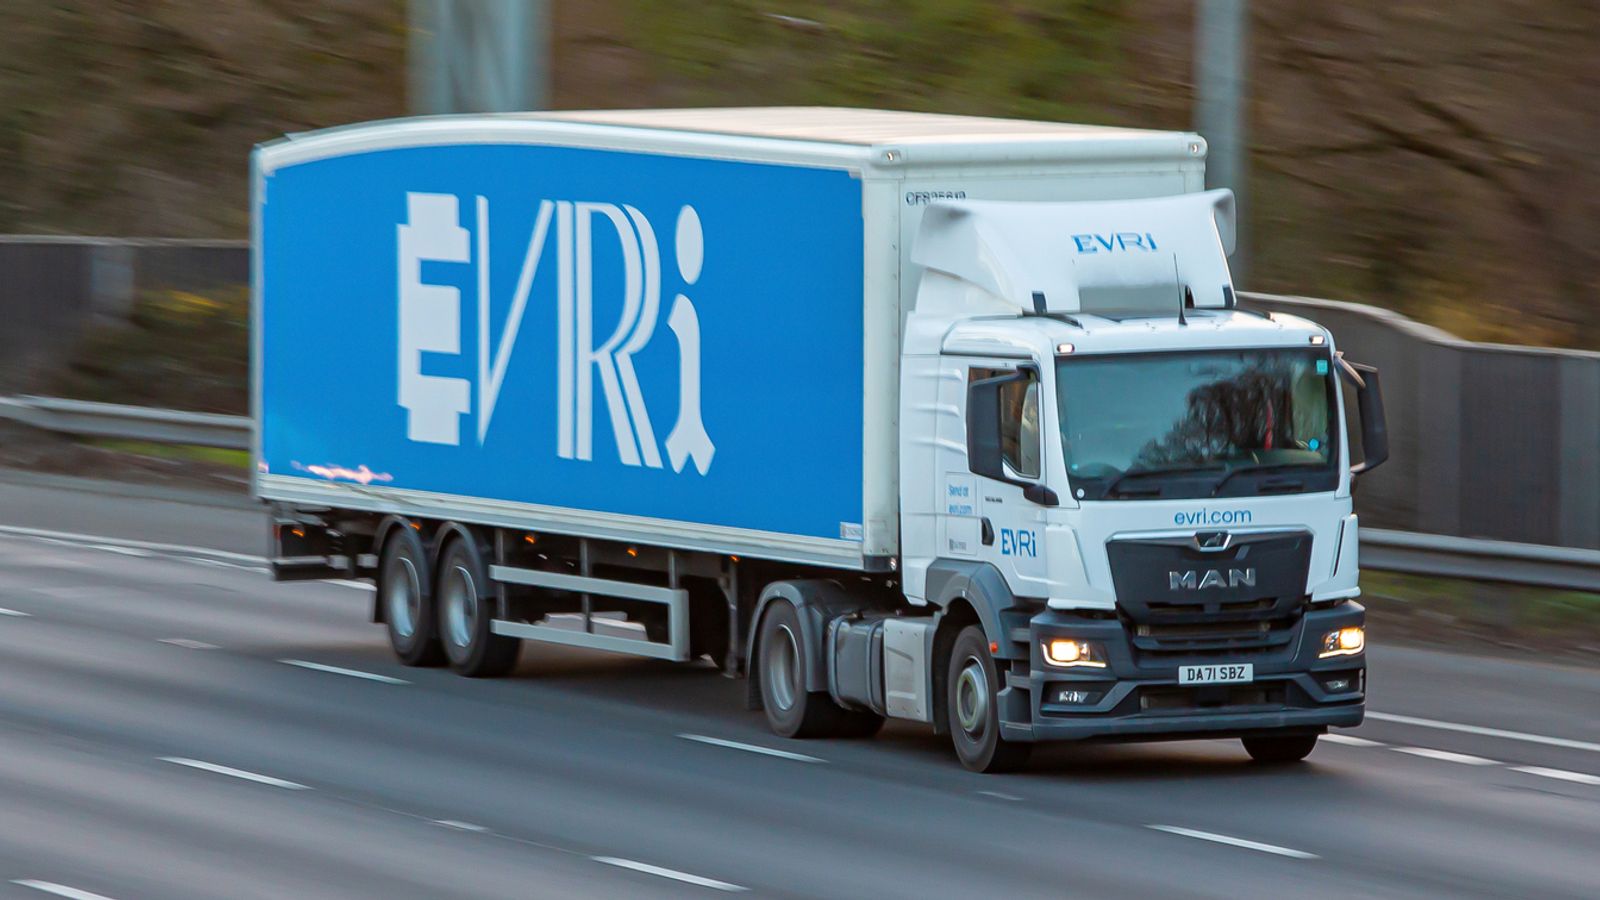 Private equity suitors aim to wrap up £2bn parcel delivery group Evri